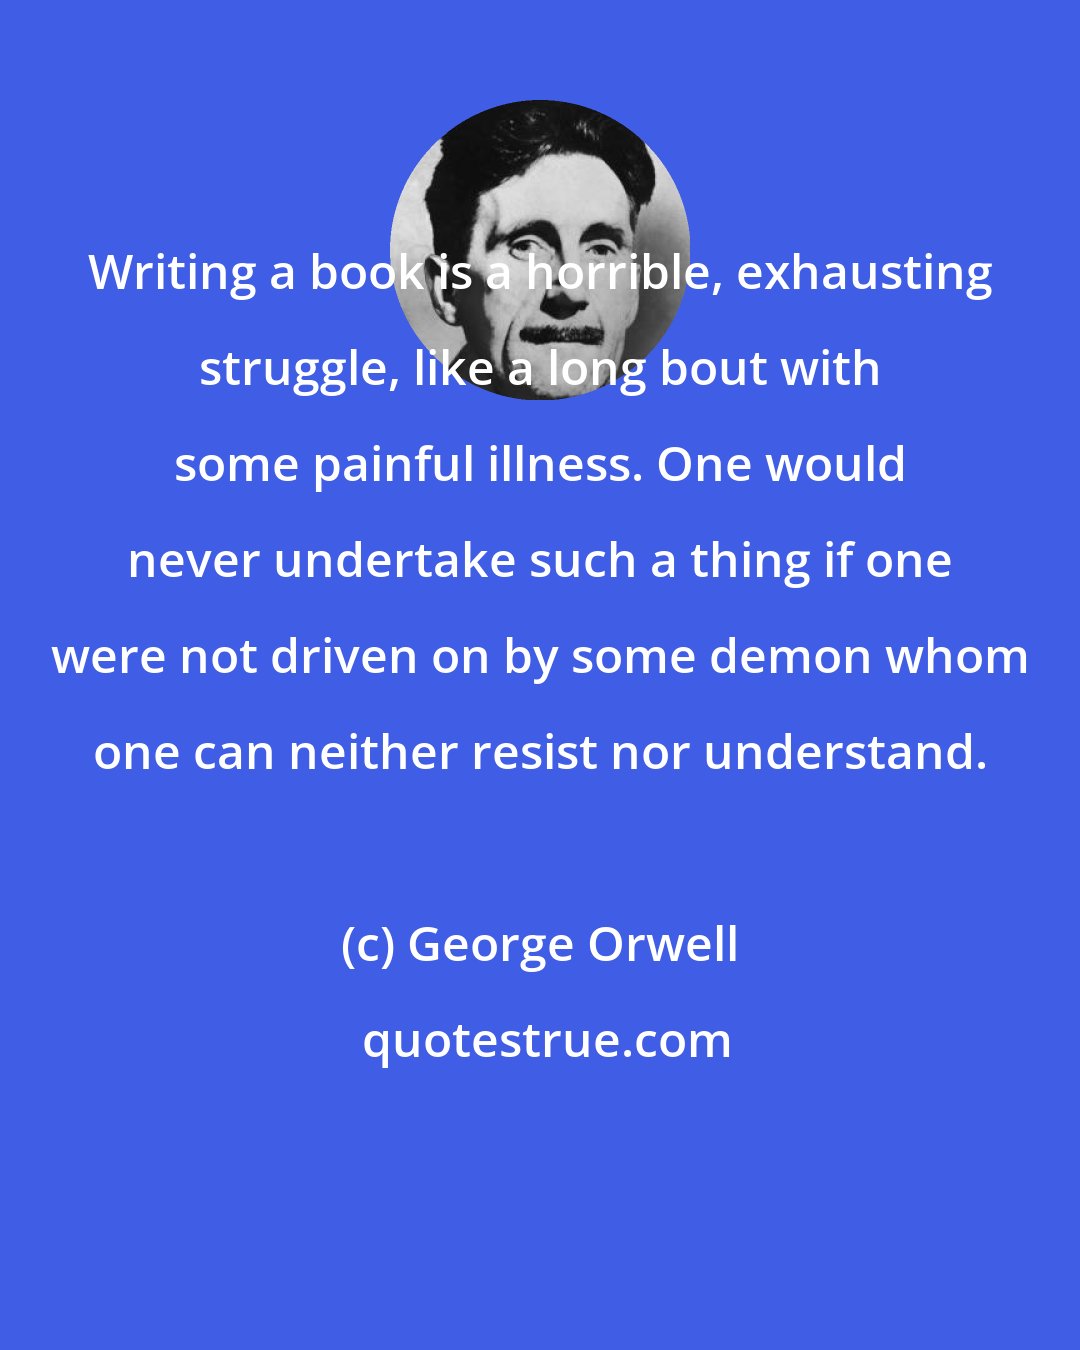 George Orwell: Writing a book is a horrible, exhausting struggle, like a long bout with some painful illness. One would never undertake such a thing if one were not driven on by some demon whom one can neither resist nor understand.